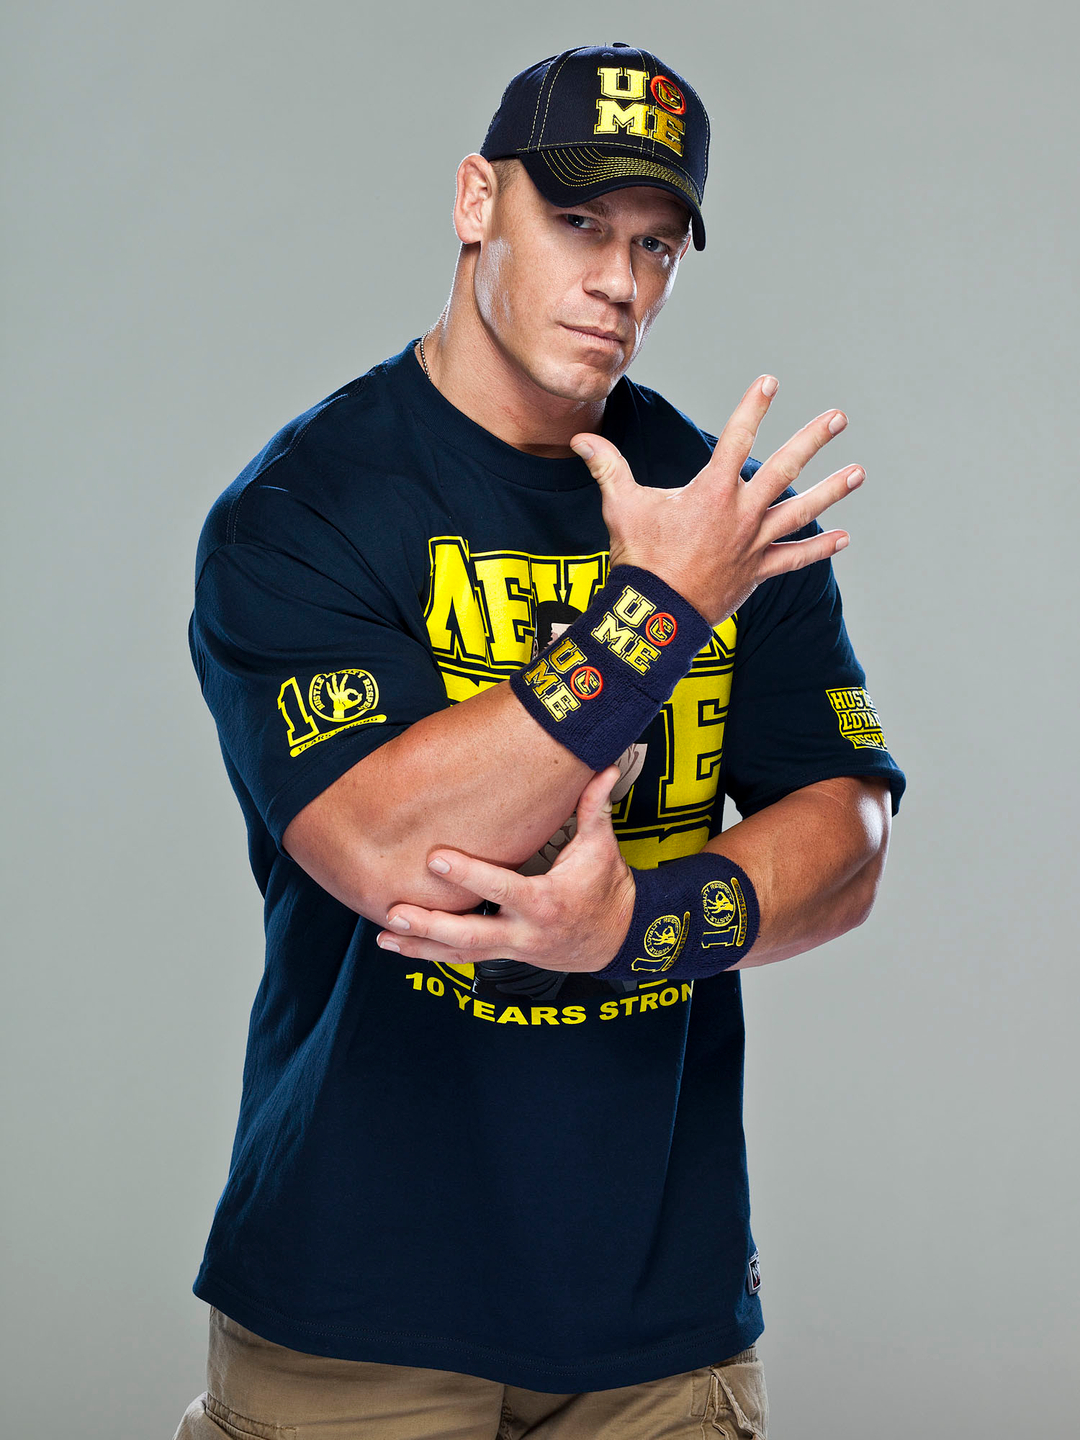 John Cena does he have a wife